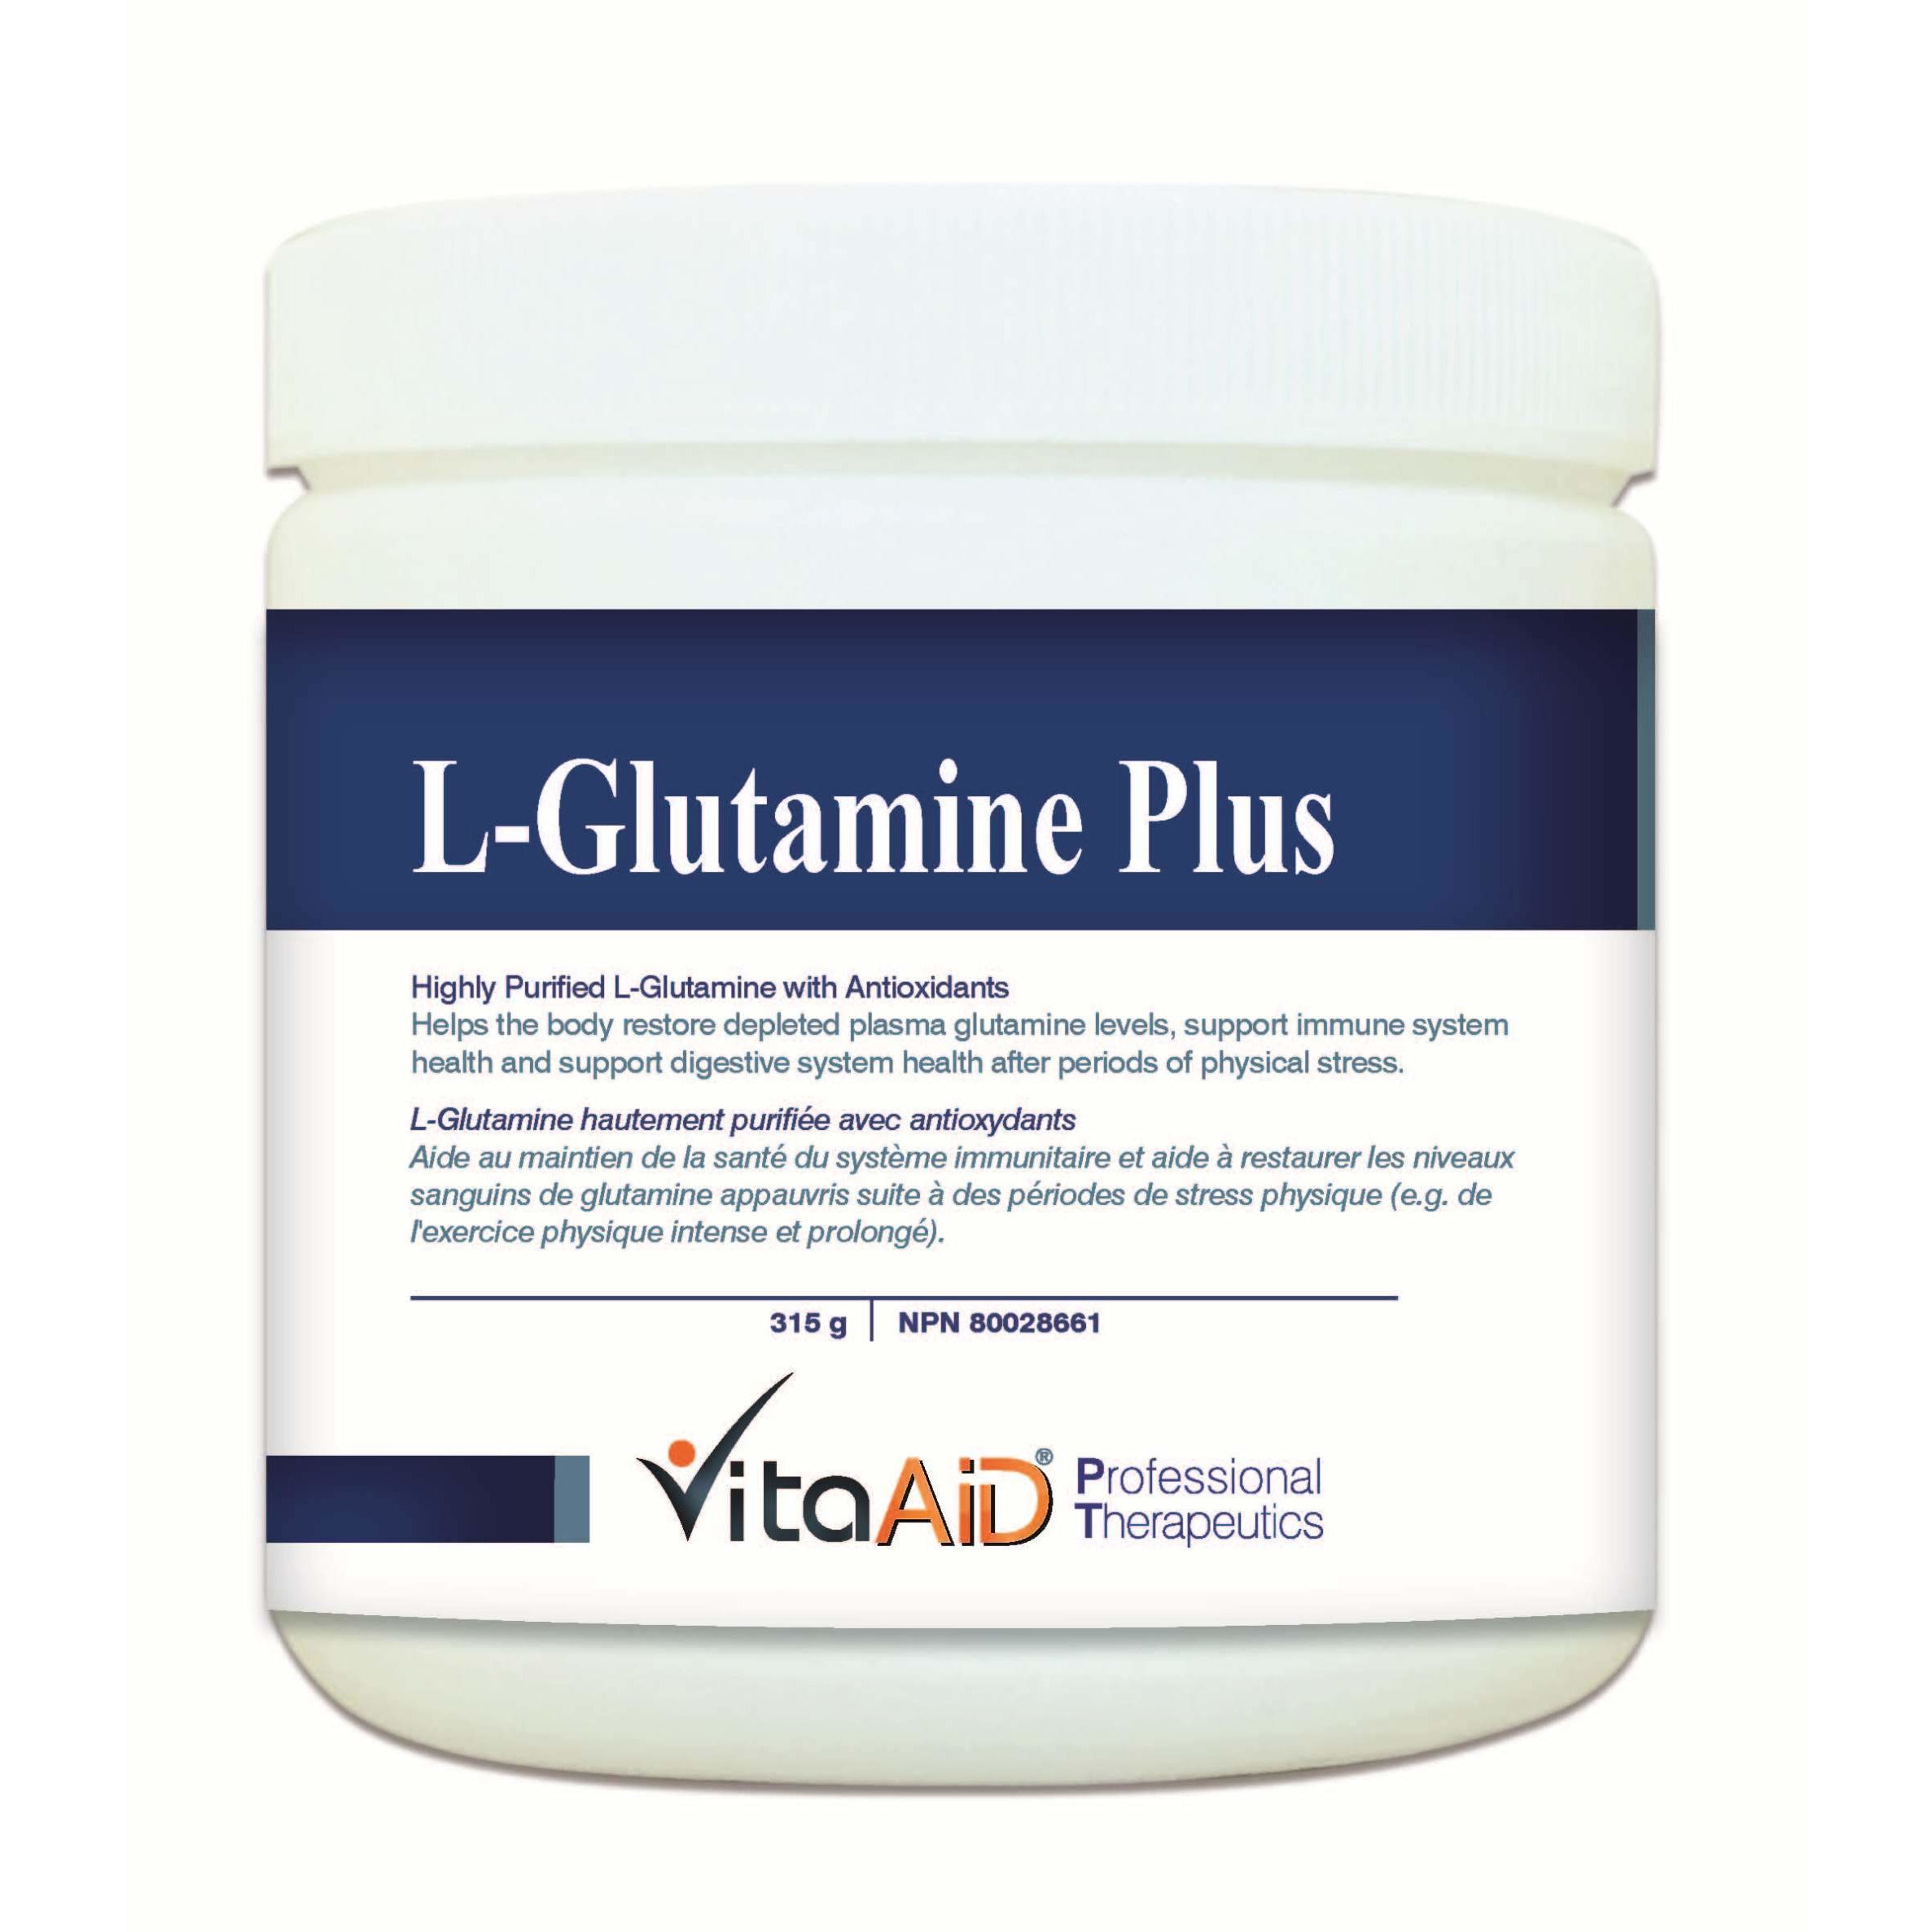 L-Glutamine Plus, Formulated with Synergized Antioxidants 315 g